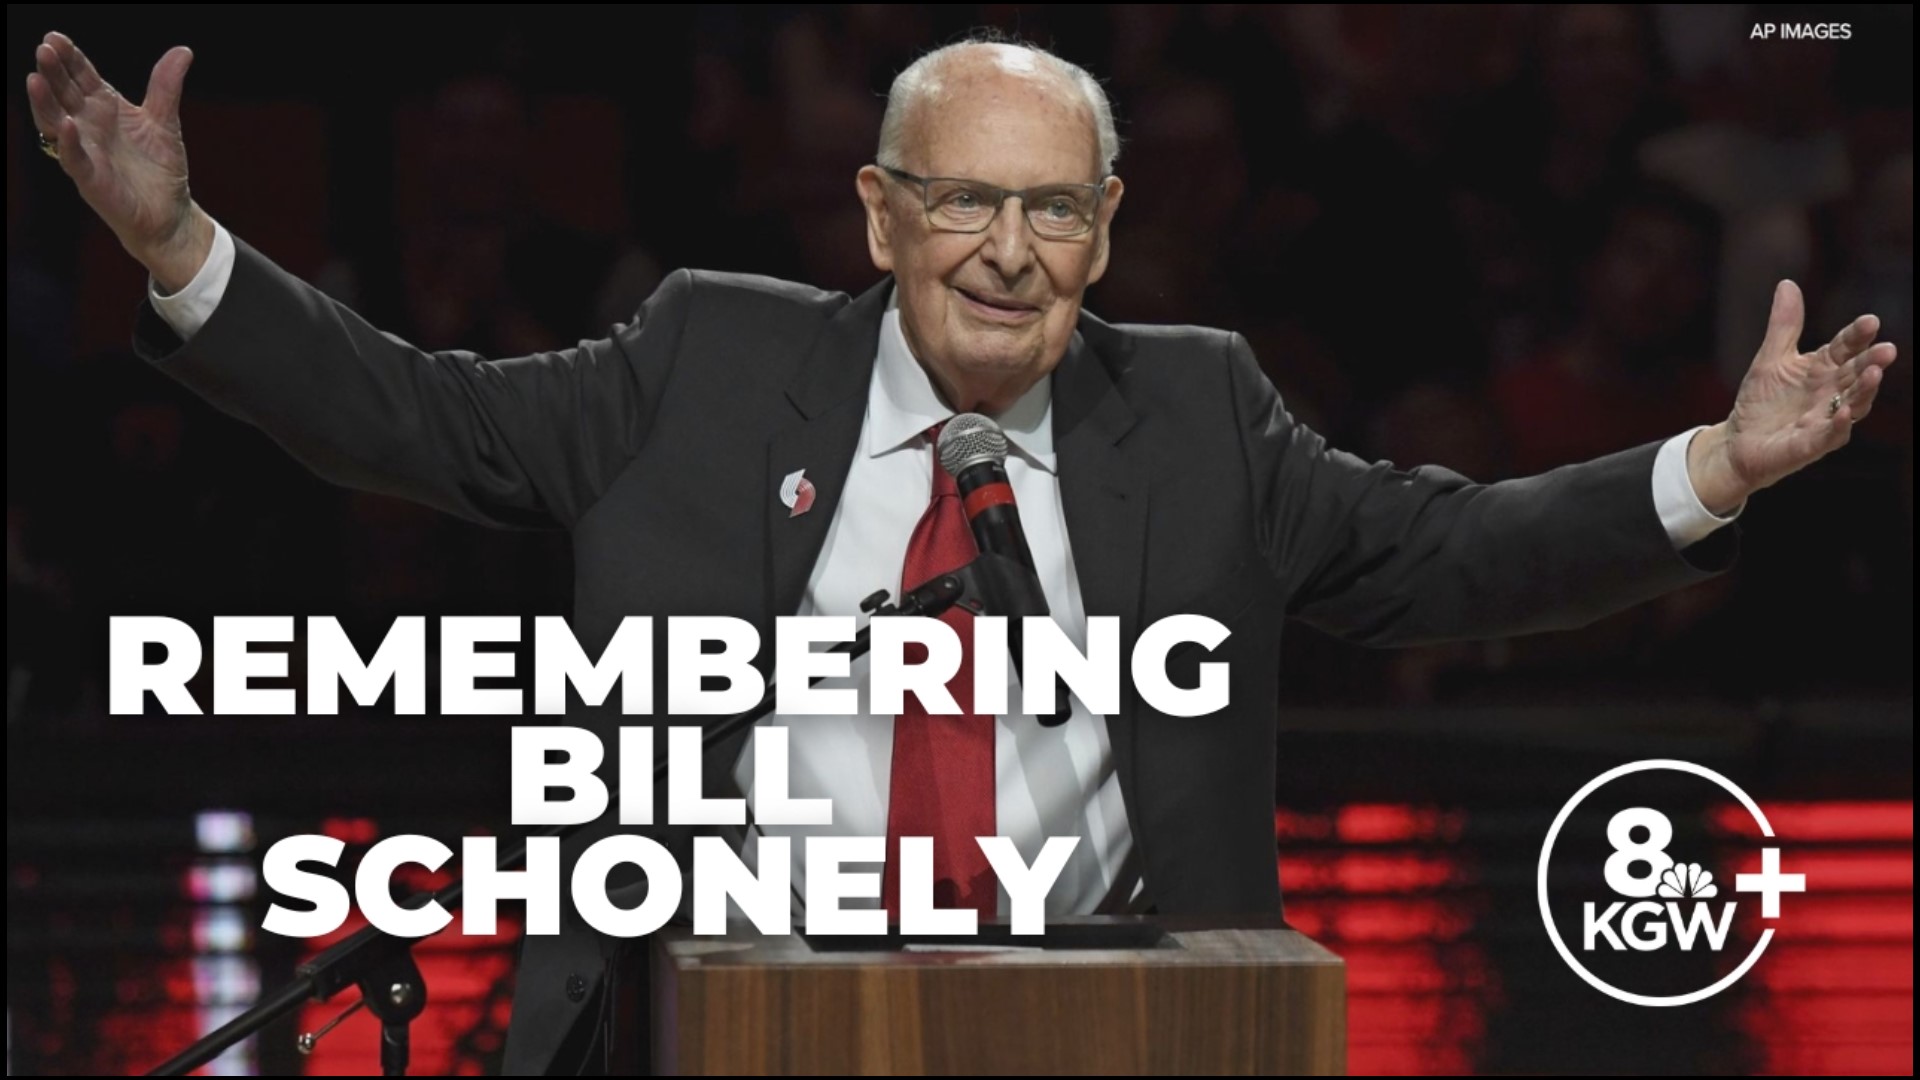 Bill Schonely died on Saturday at the age of 93. He was the Trail Blazers play-by-play announcer for nearly 30 years.